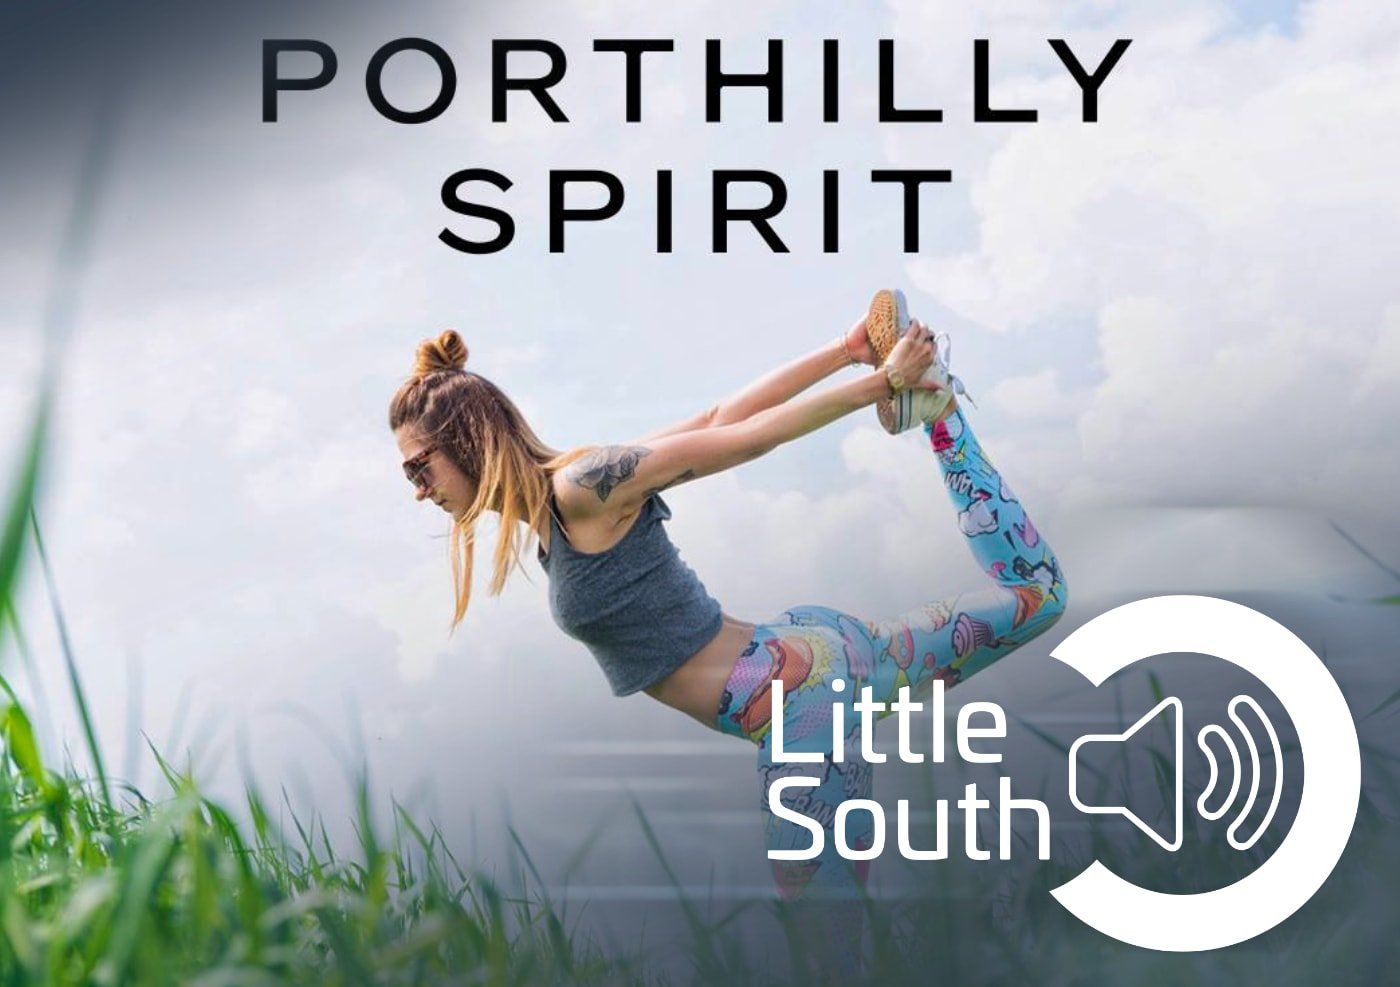 North Cornwall Music Festival, Porthilly Spirit Gets Cancelled